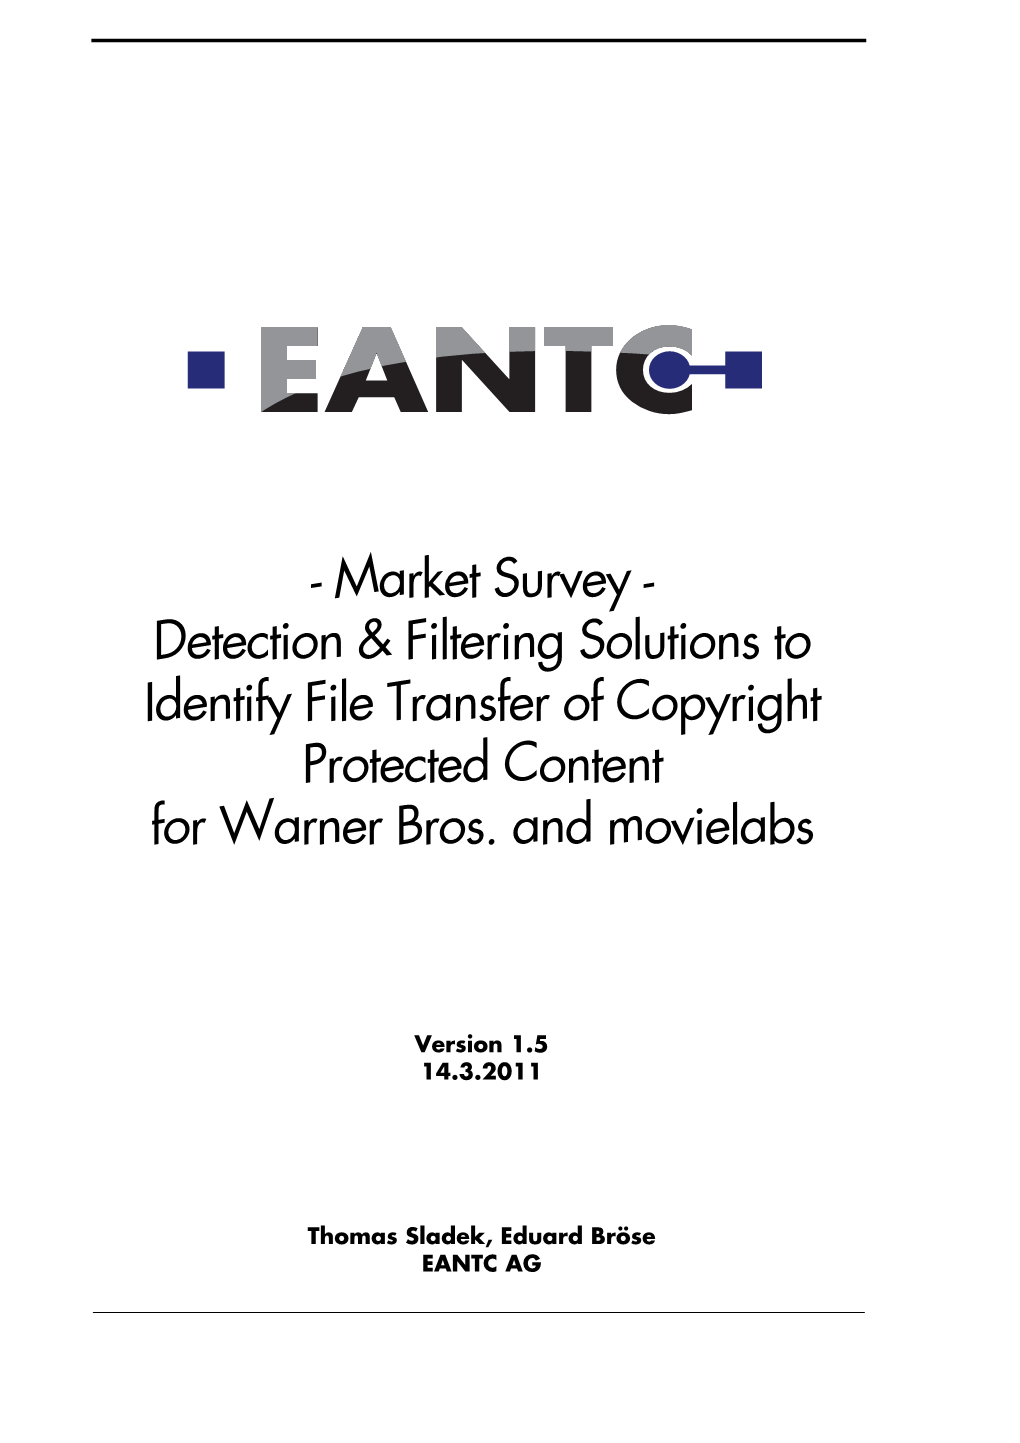 Market Survey - Detection & Filtering Solutions to Identify File Transfer of Copyright Protected Content for Warner Bros